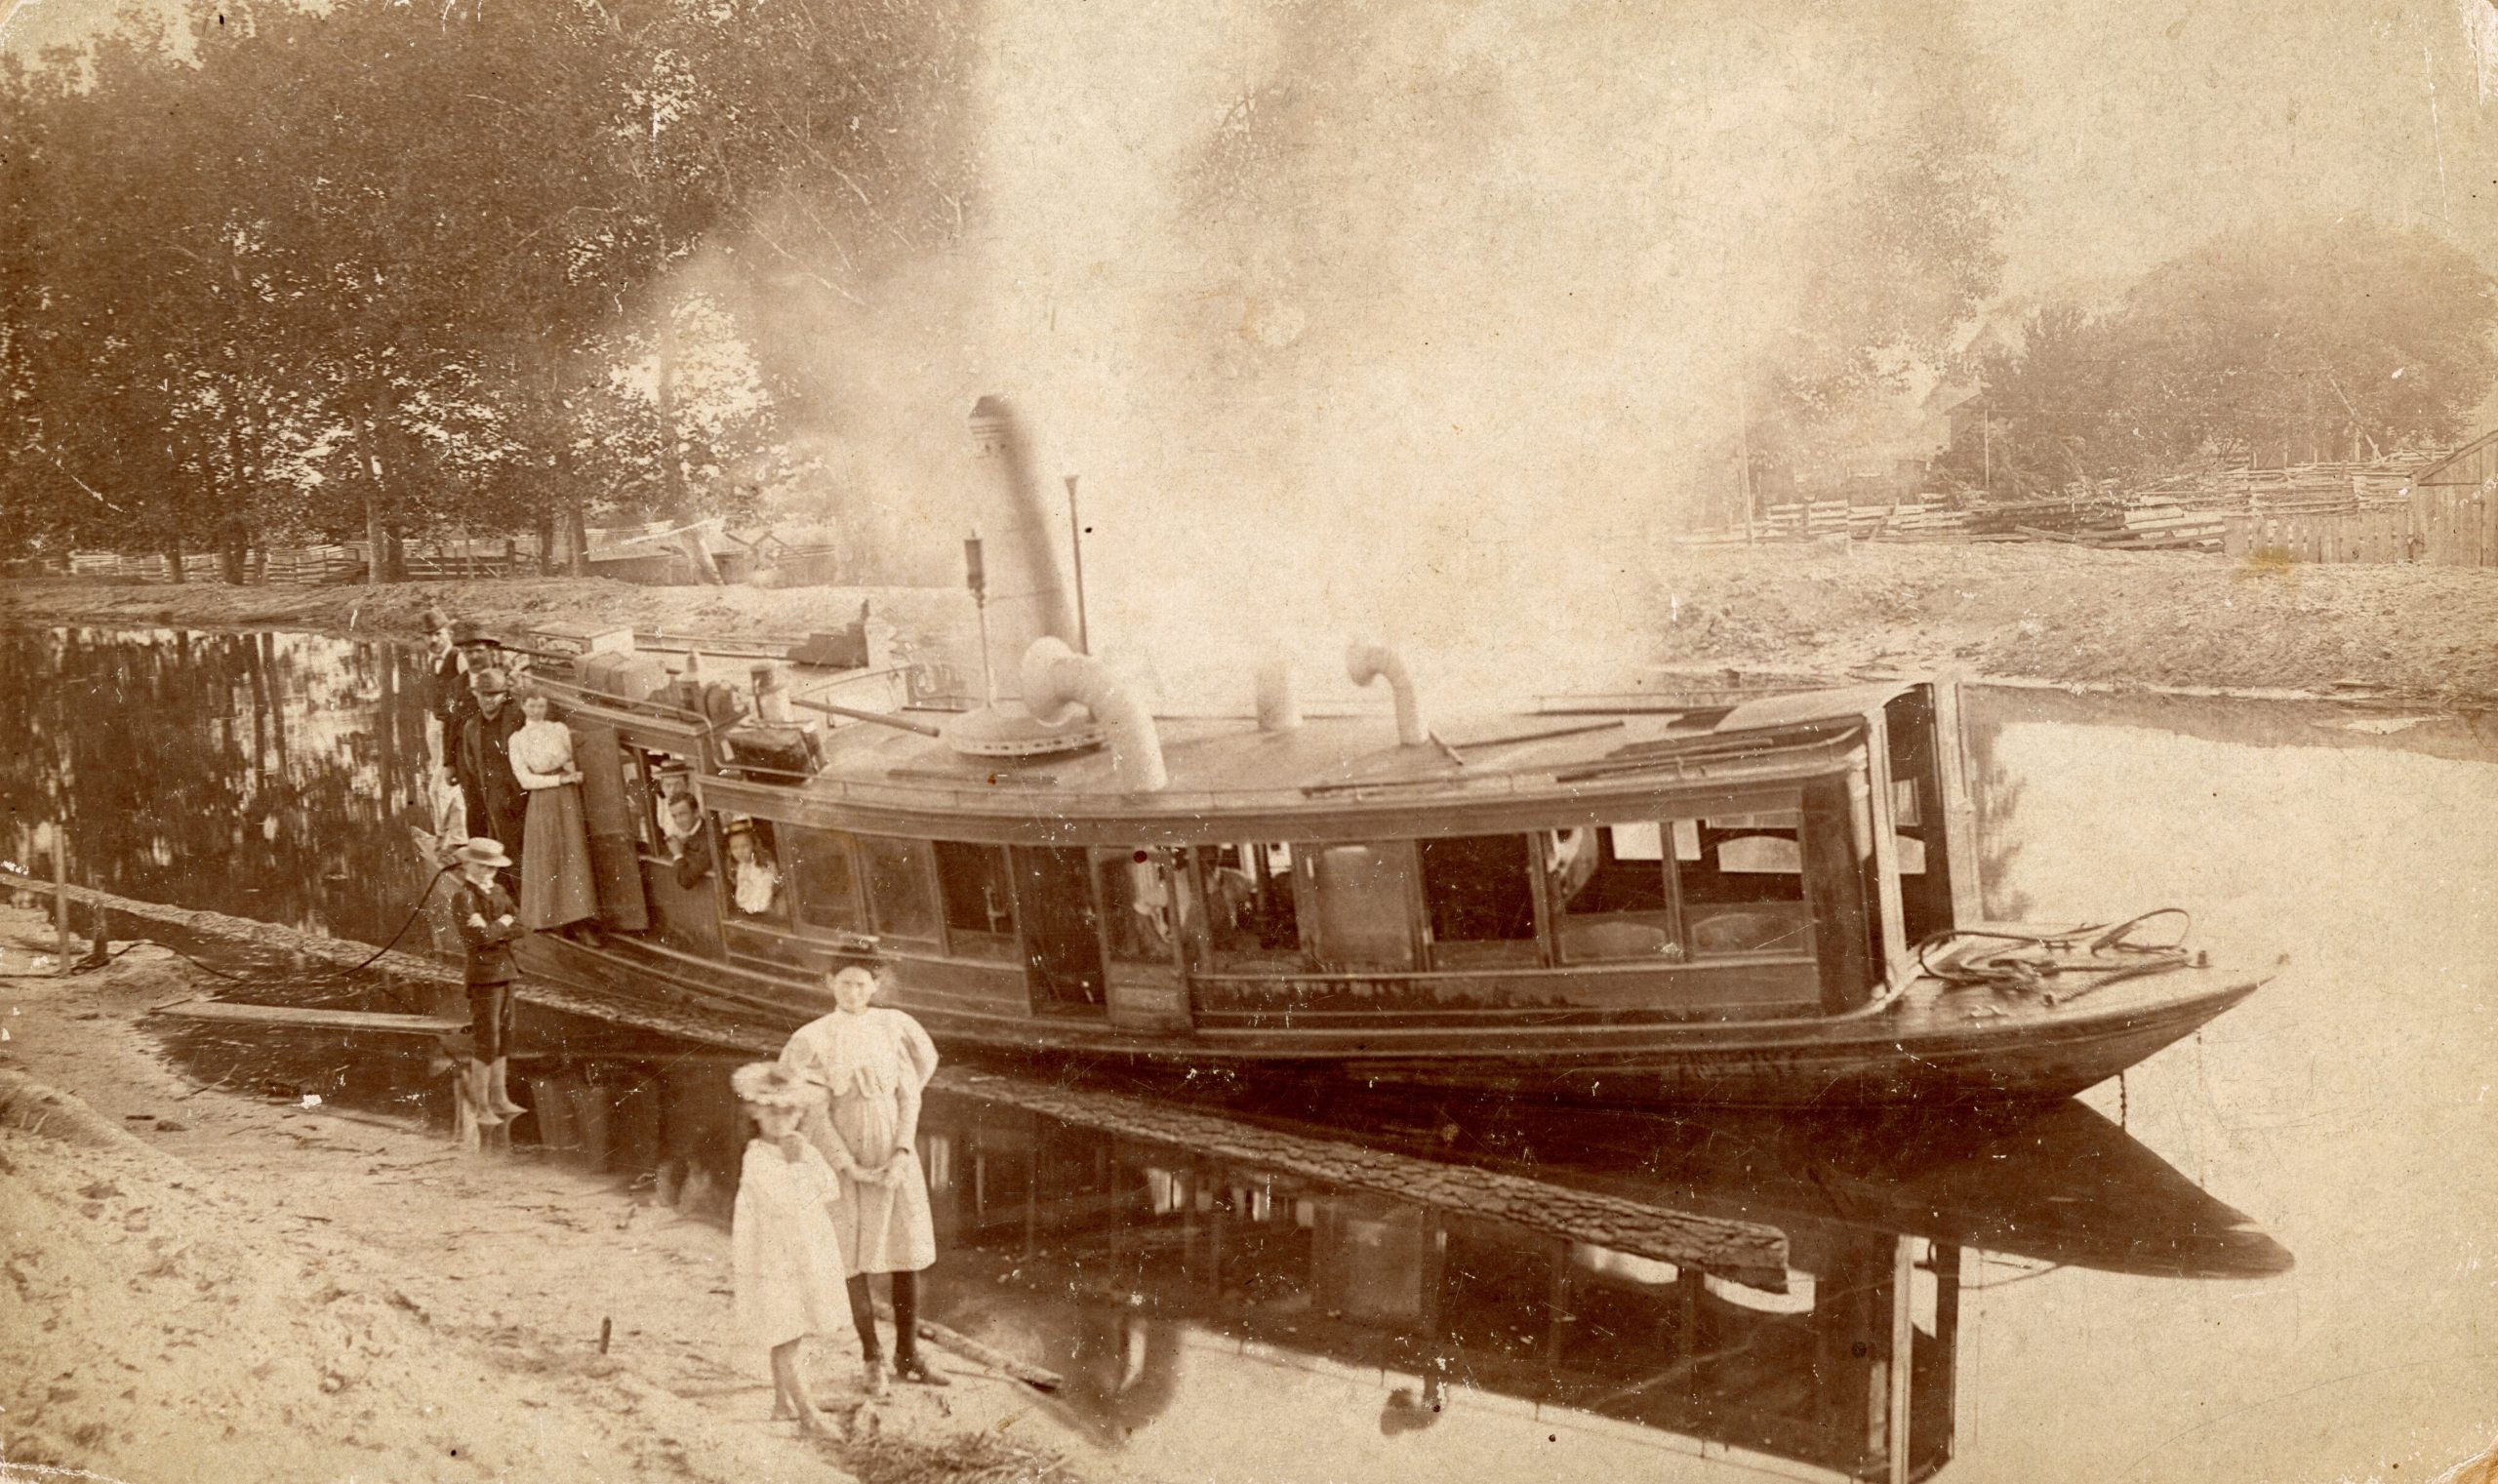 Commercial boat on the side of a canal with several people standing on the boat and two children standing on the shore in front of it.